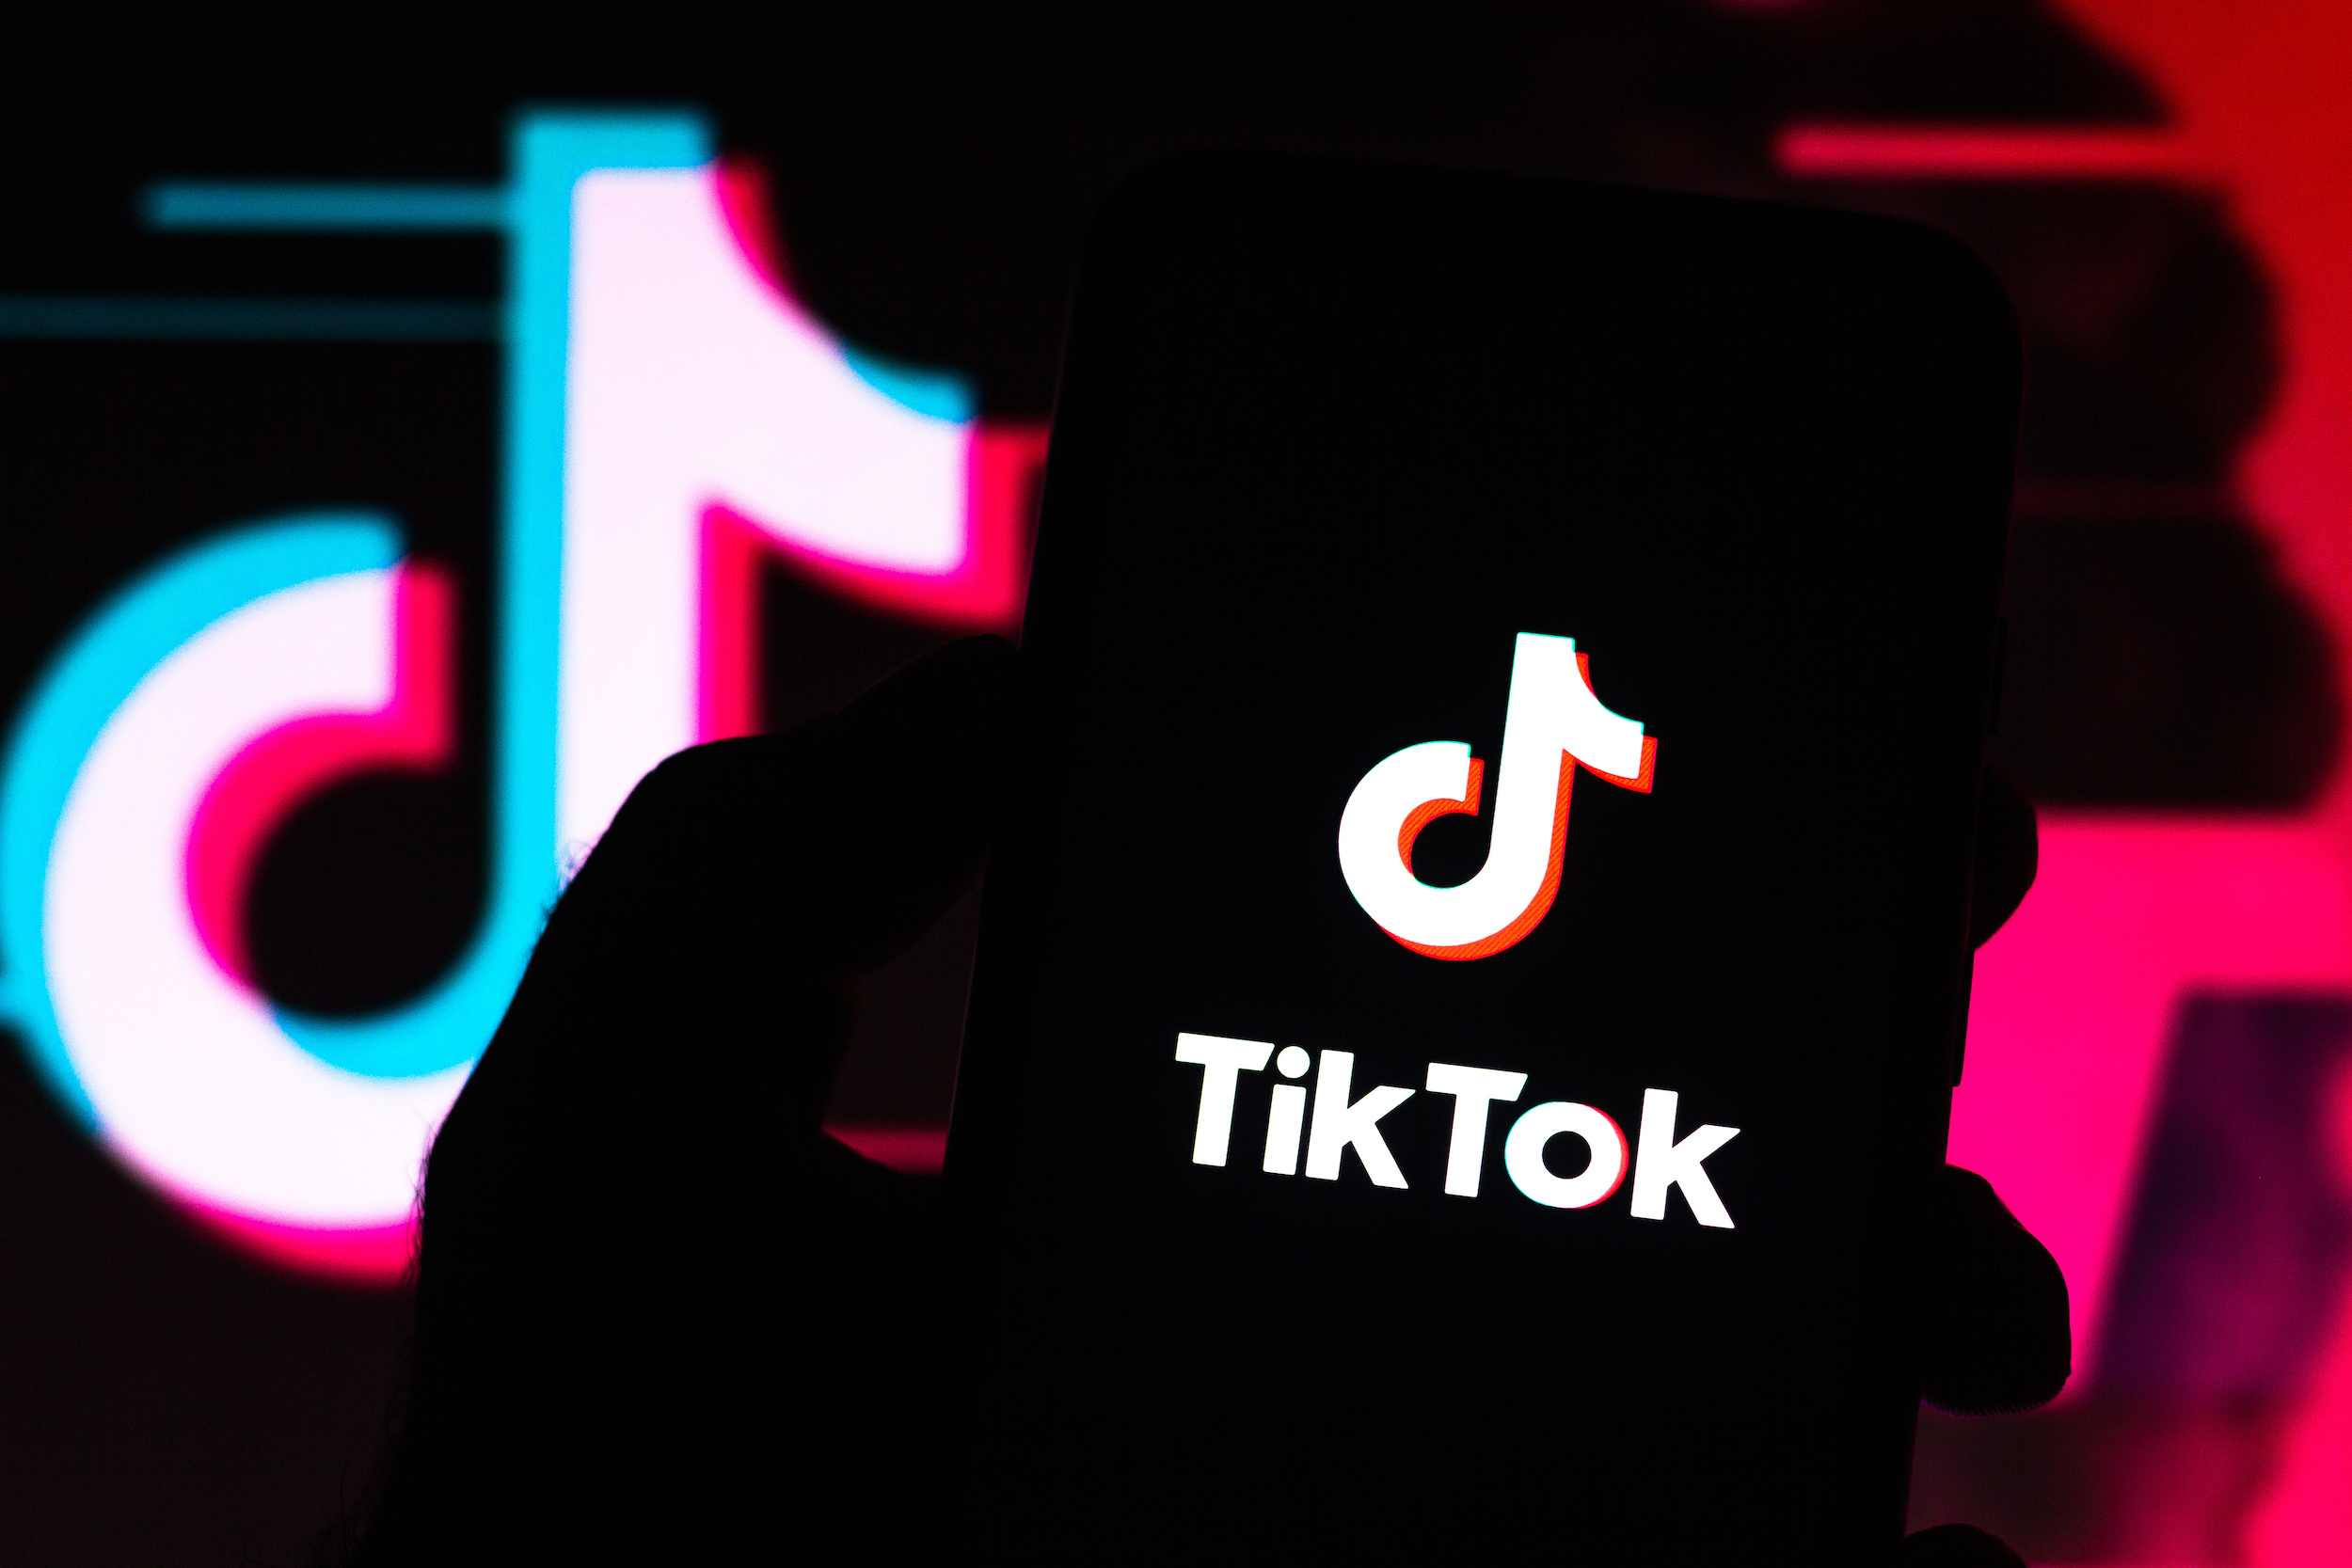 simi-apologizes-to-lgbt-community-microsoft-to-buy-tiktok-iker-casillas-retires-latest-news-global-world-stories-tuesday-august-2020-style-rave